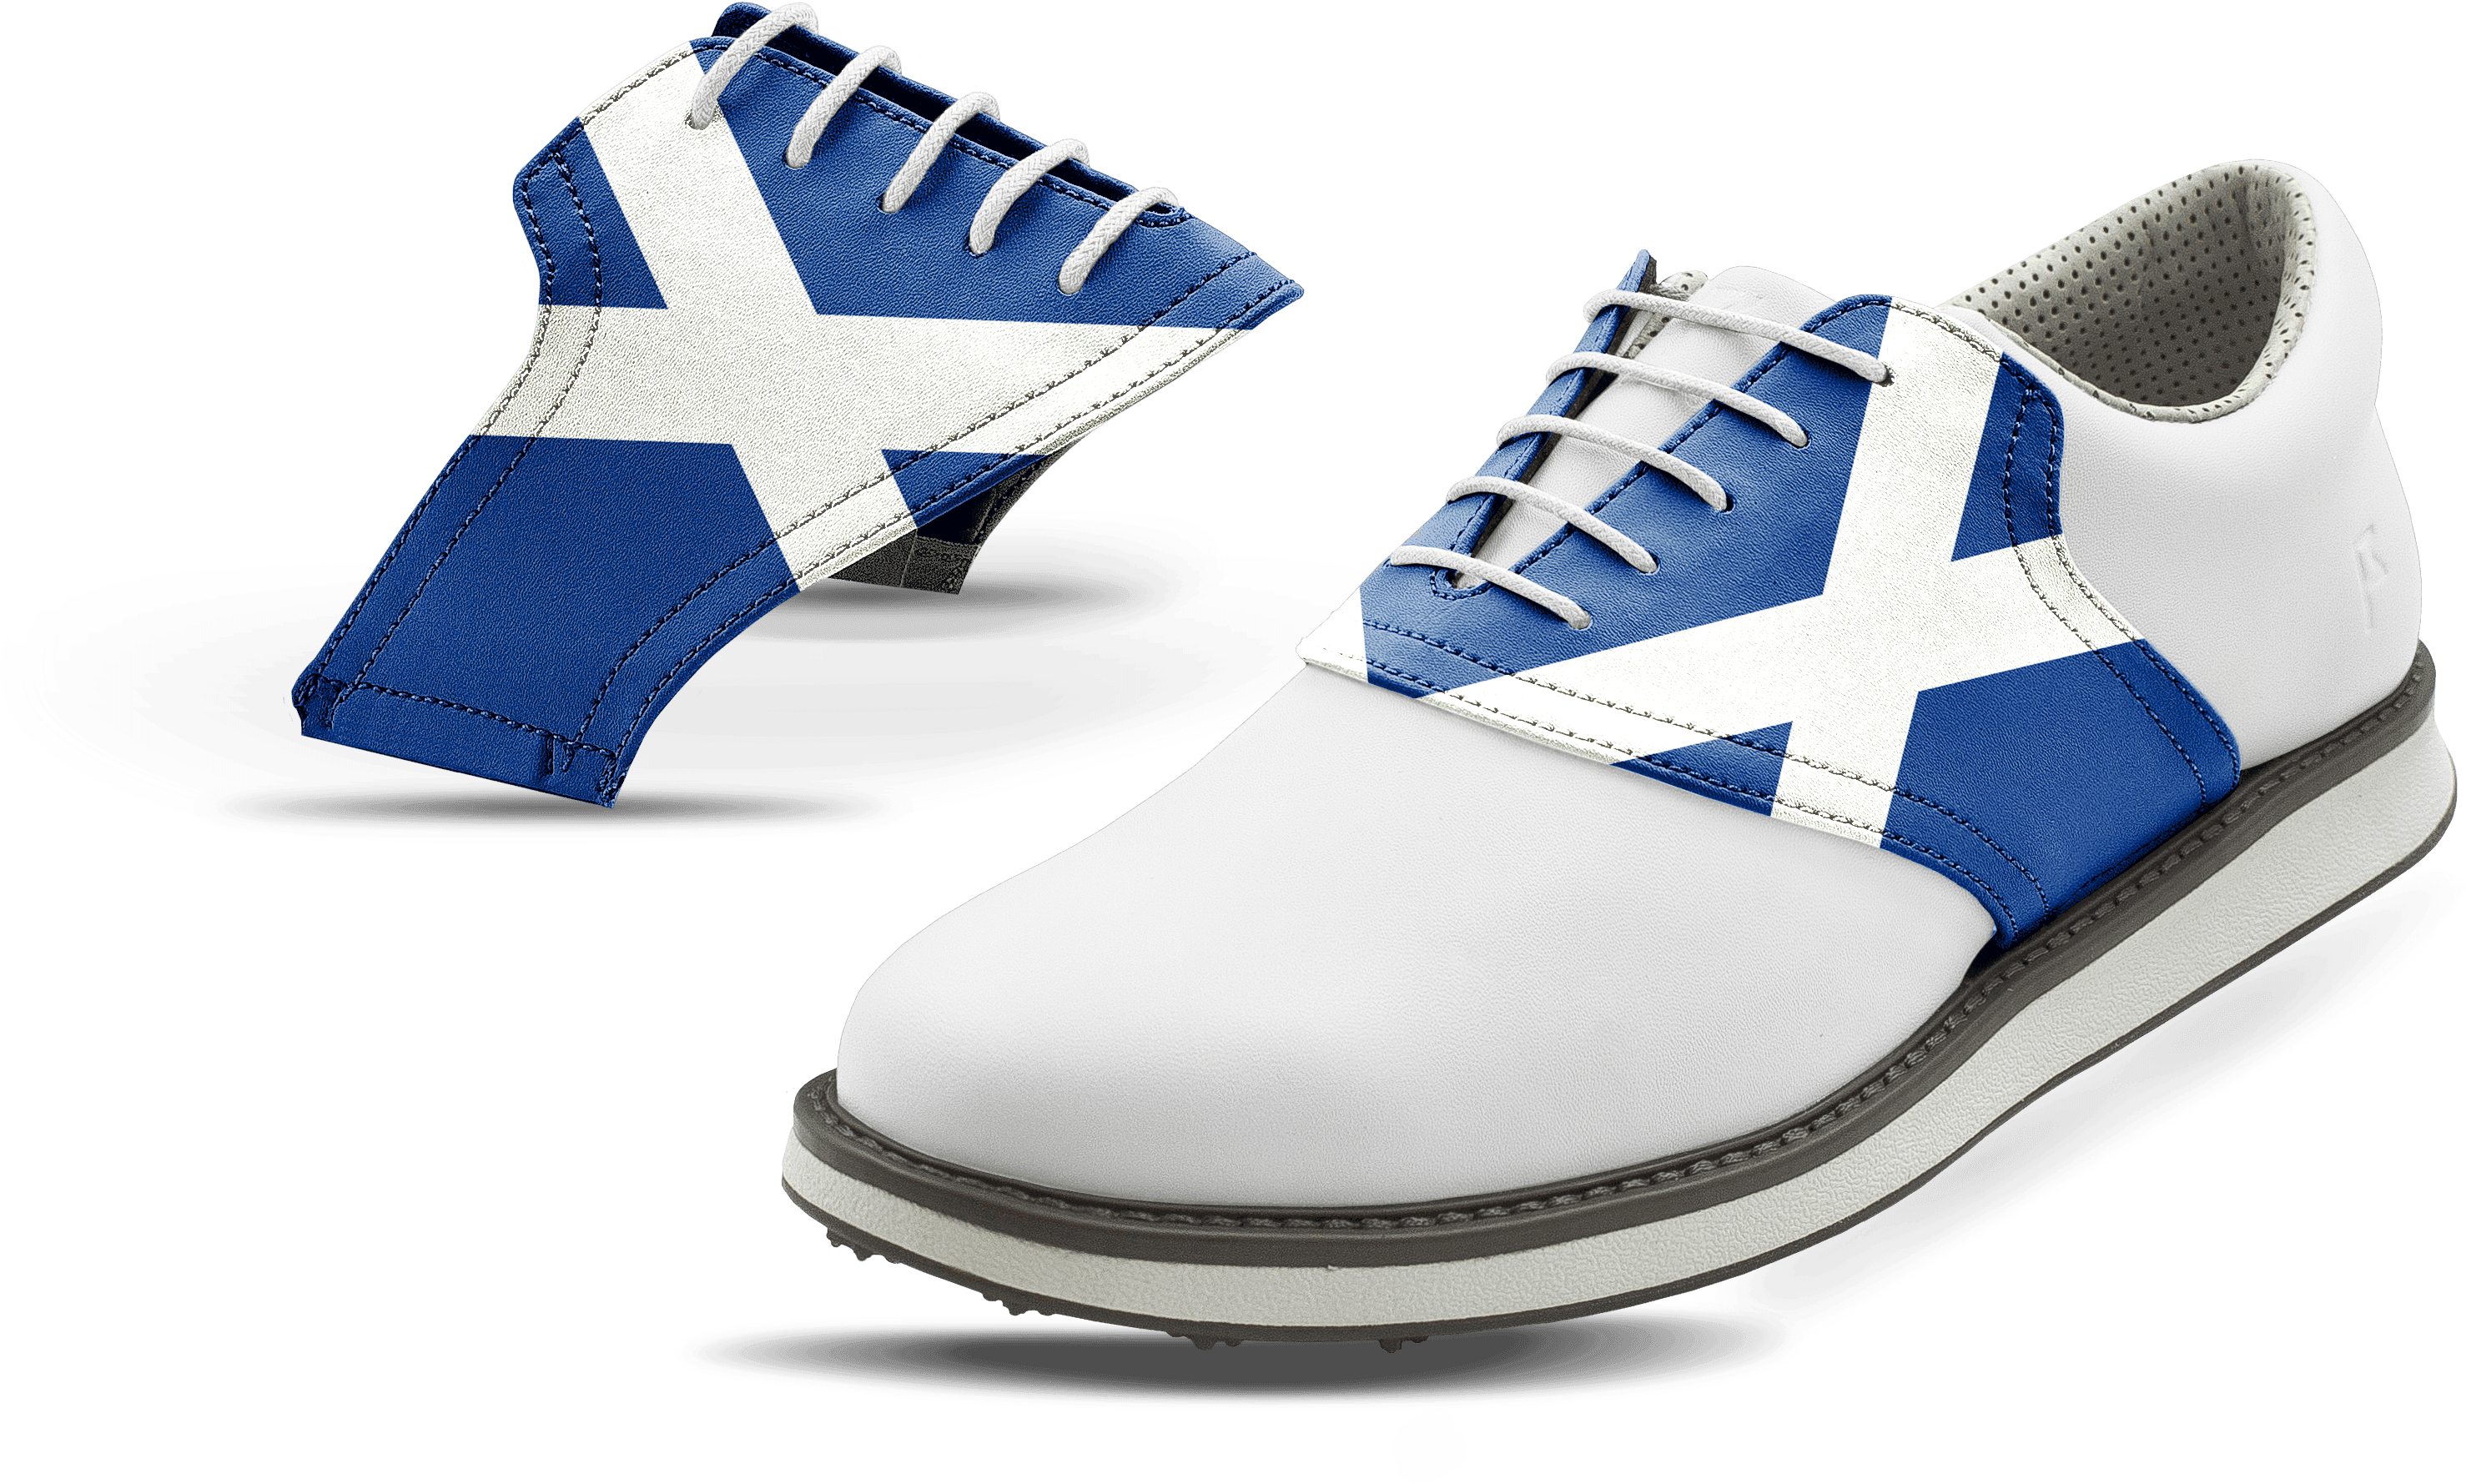 A White Shoe With Blue And White X On It